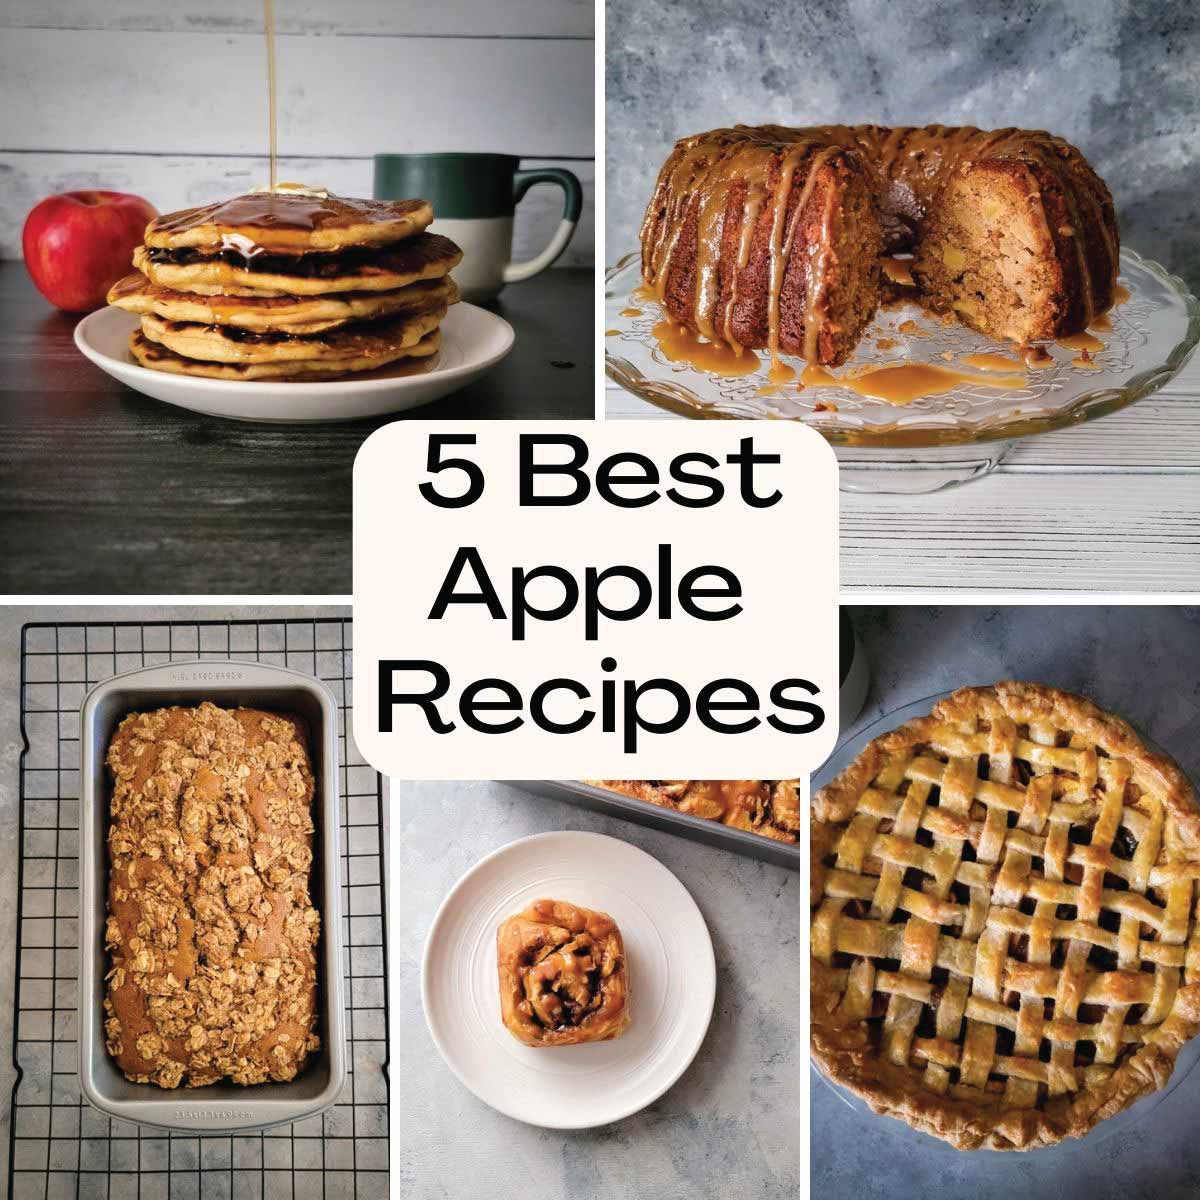 5 Best Apple Recipes to Try This Fall